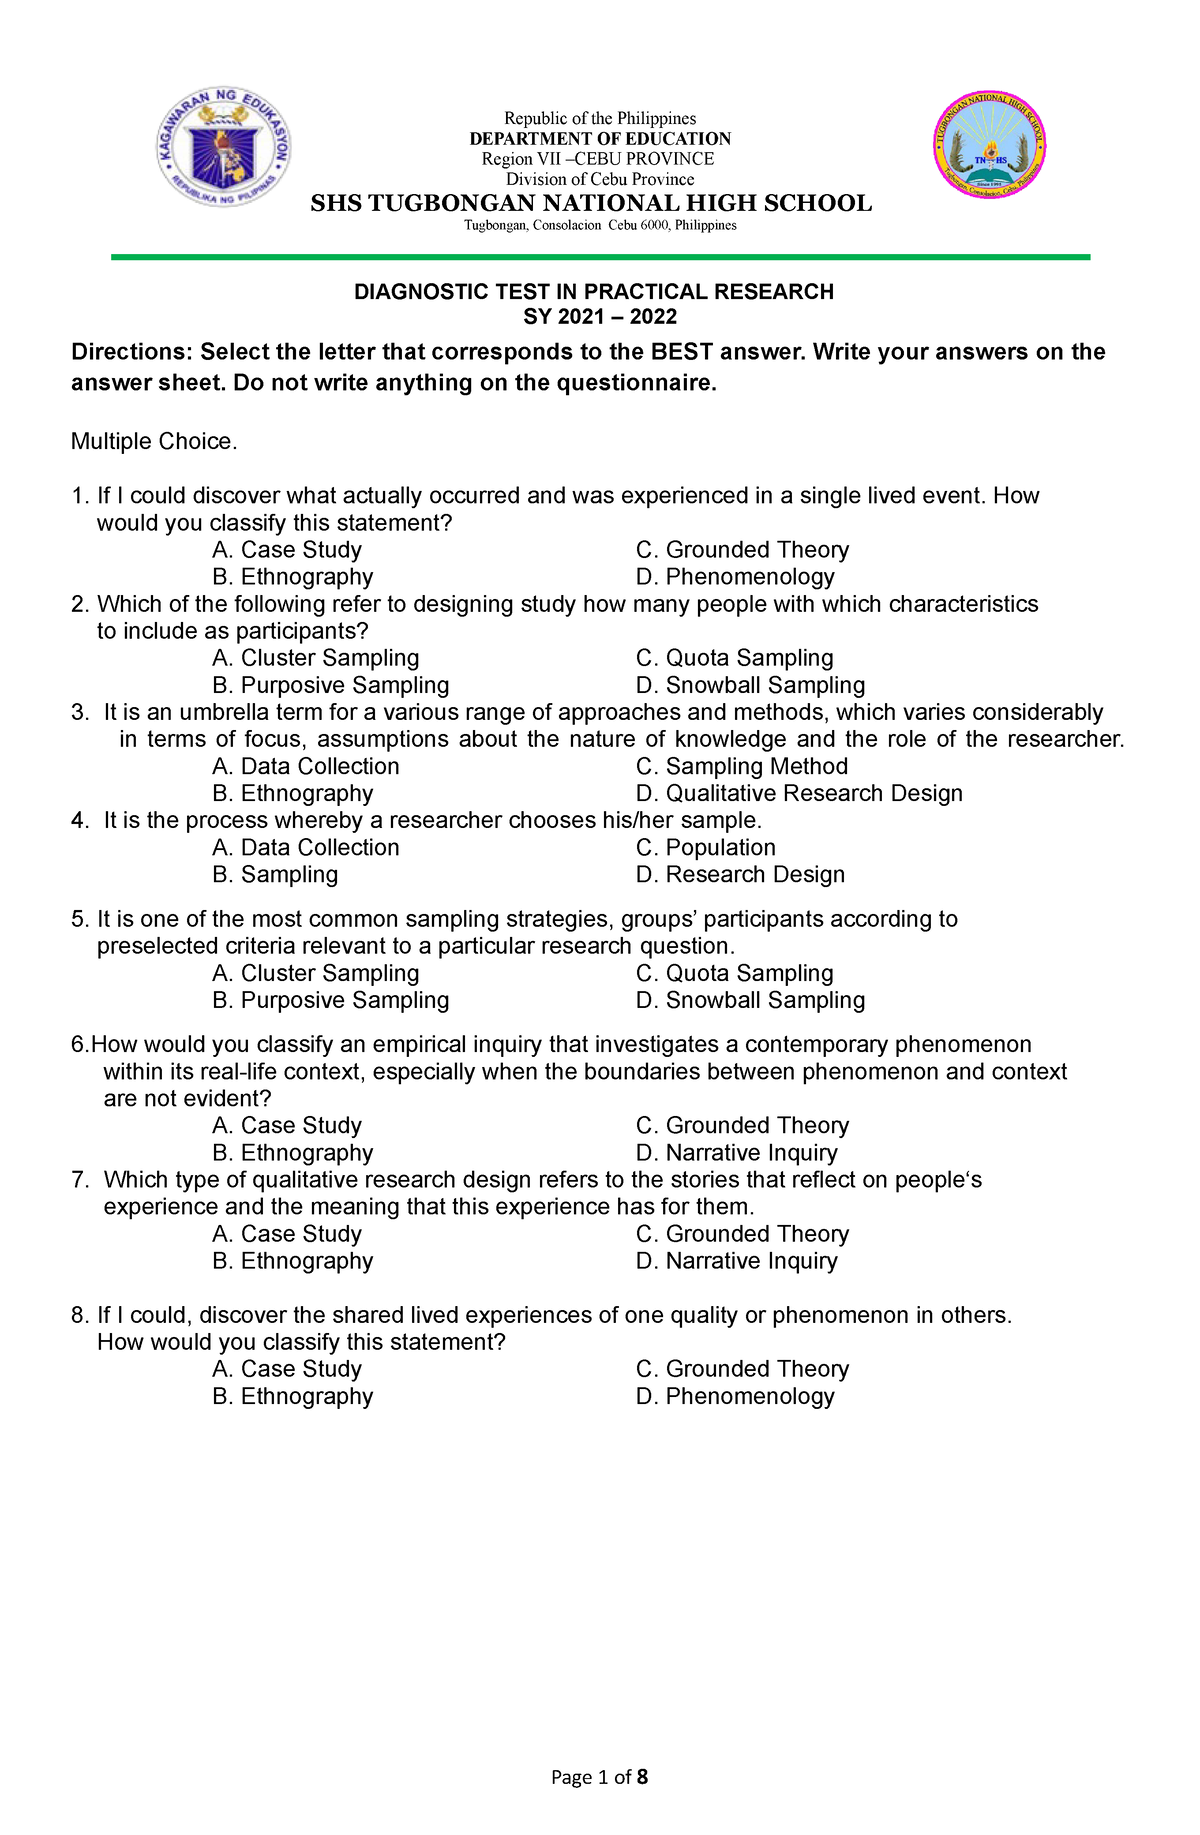 practical research 1 test questions and answers